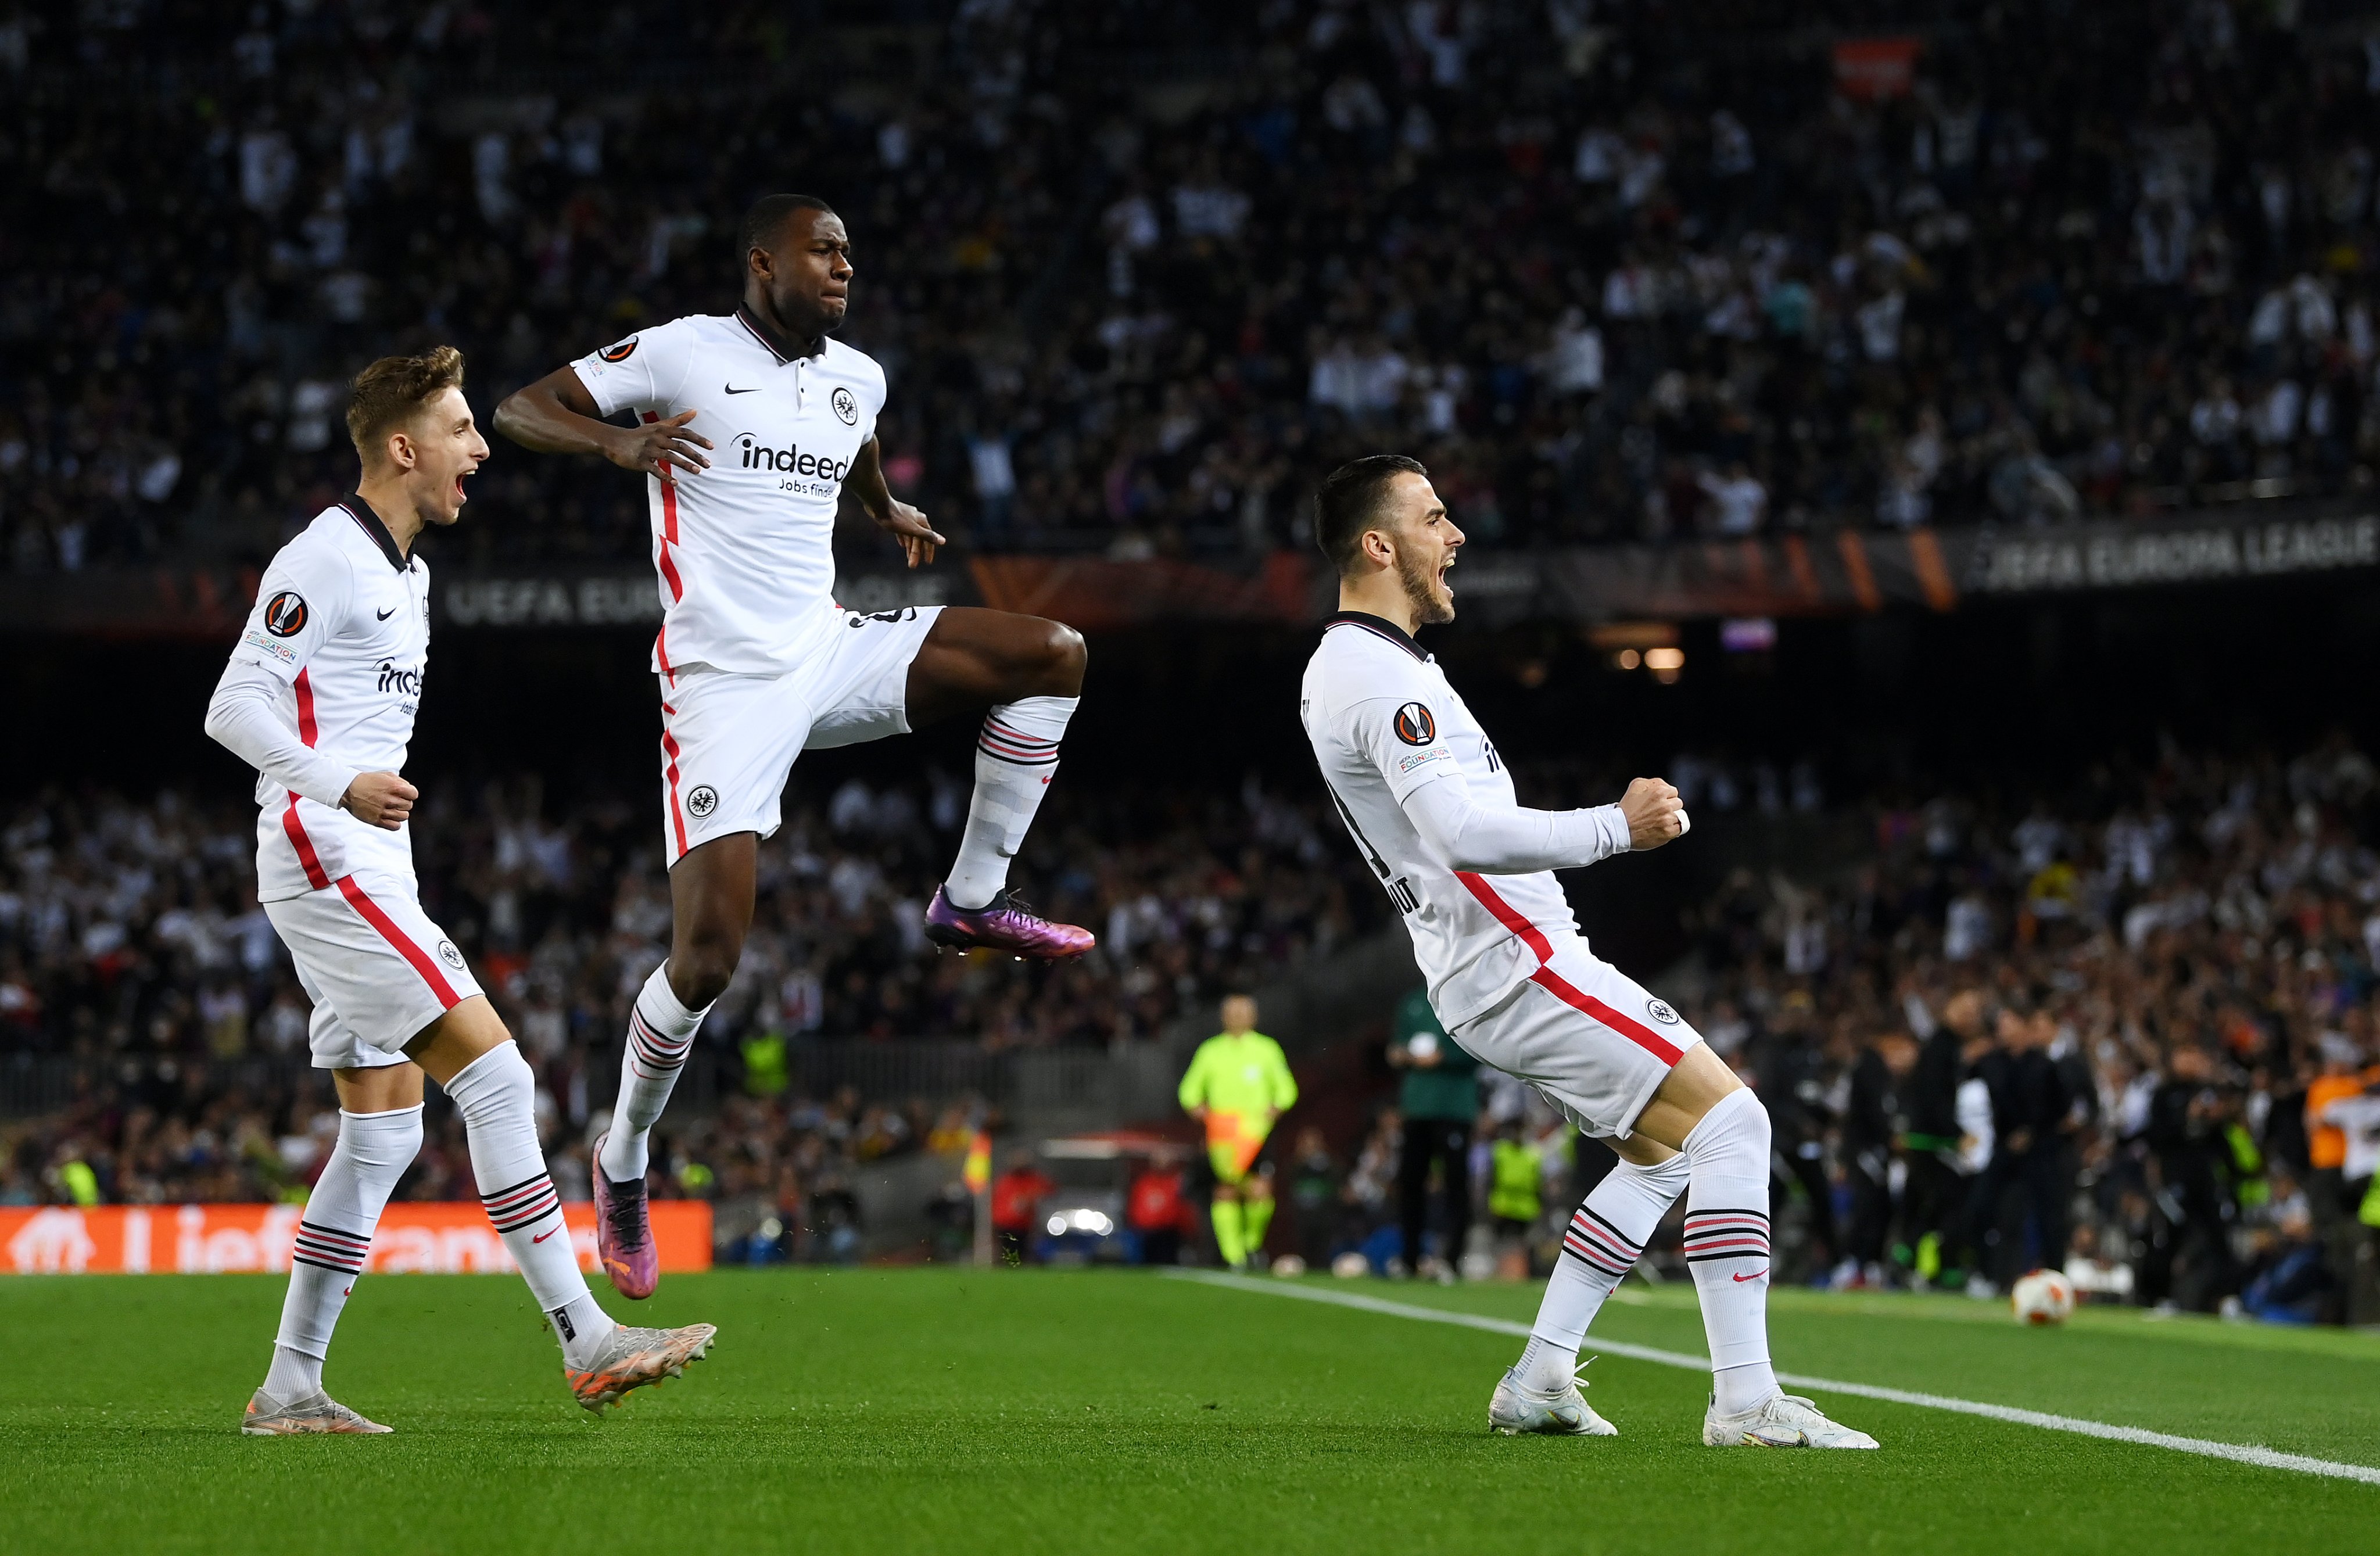 UEFA Europa League Quarterfinal: Barcelona KNOCKED OUT in a shocking defeat at Camp Nou, Barcelona lose 3-4: Eintracht Frankfurt face West Ham United in semifinal - Check HIGHLIGHTS